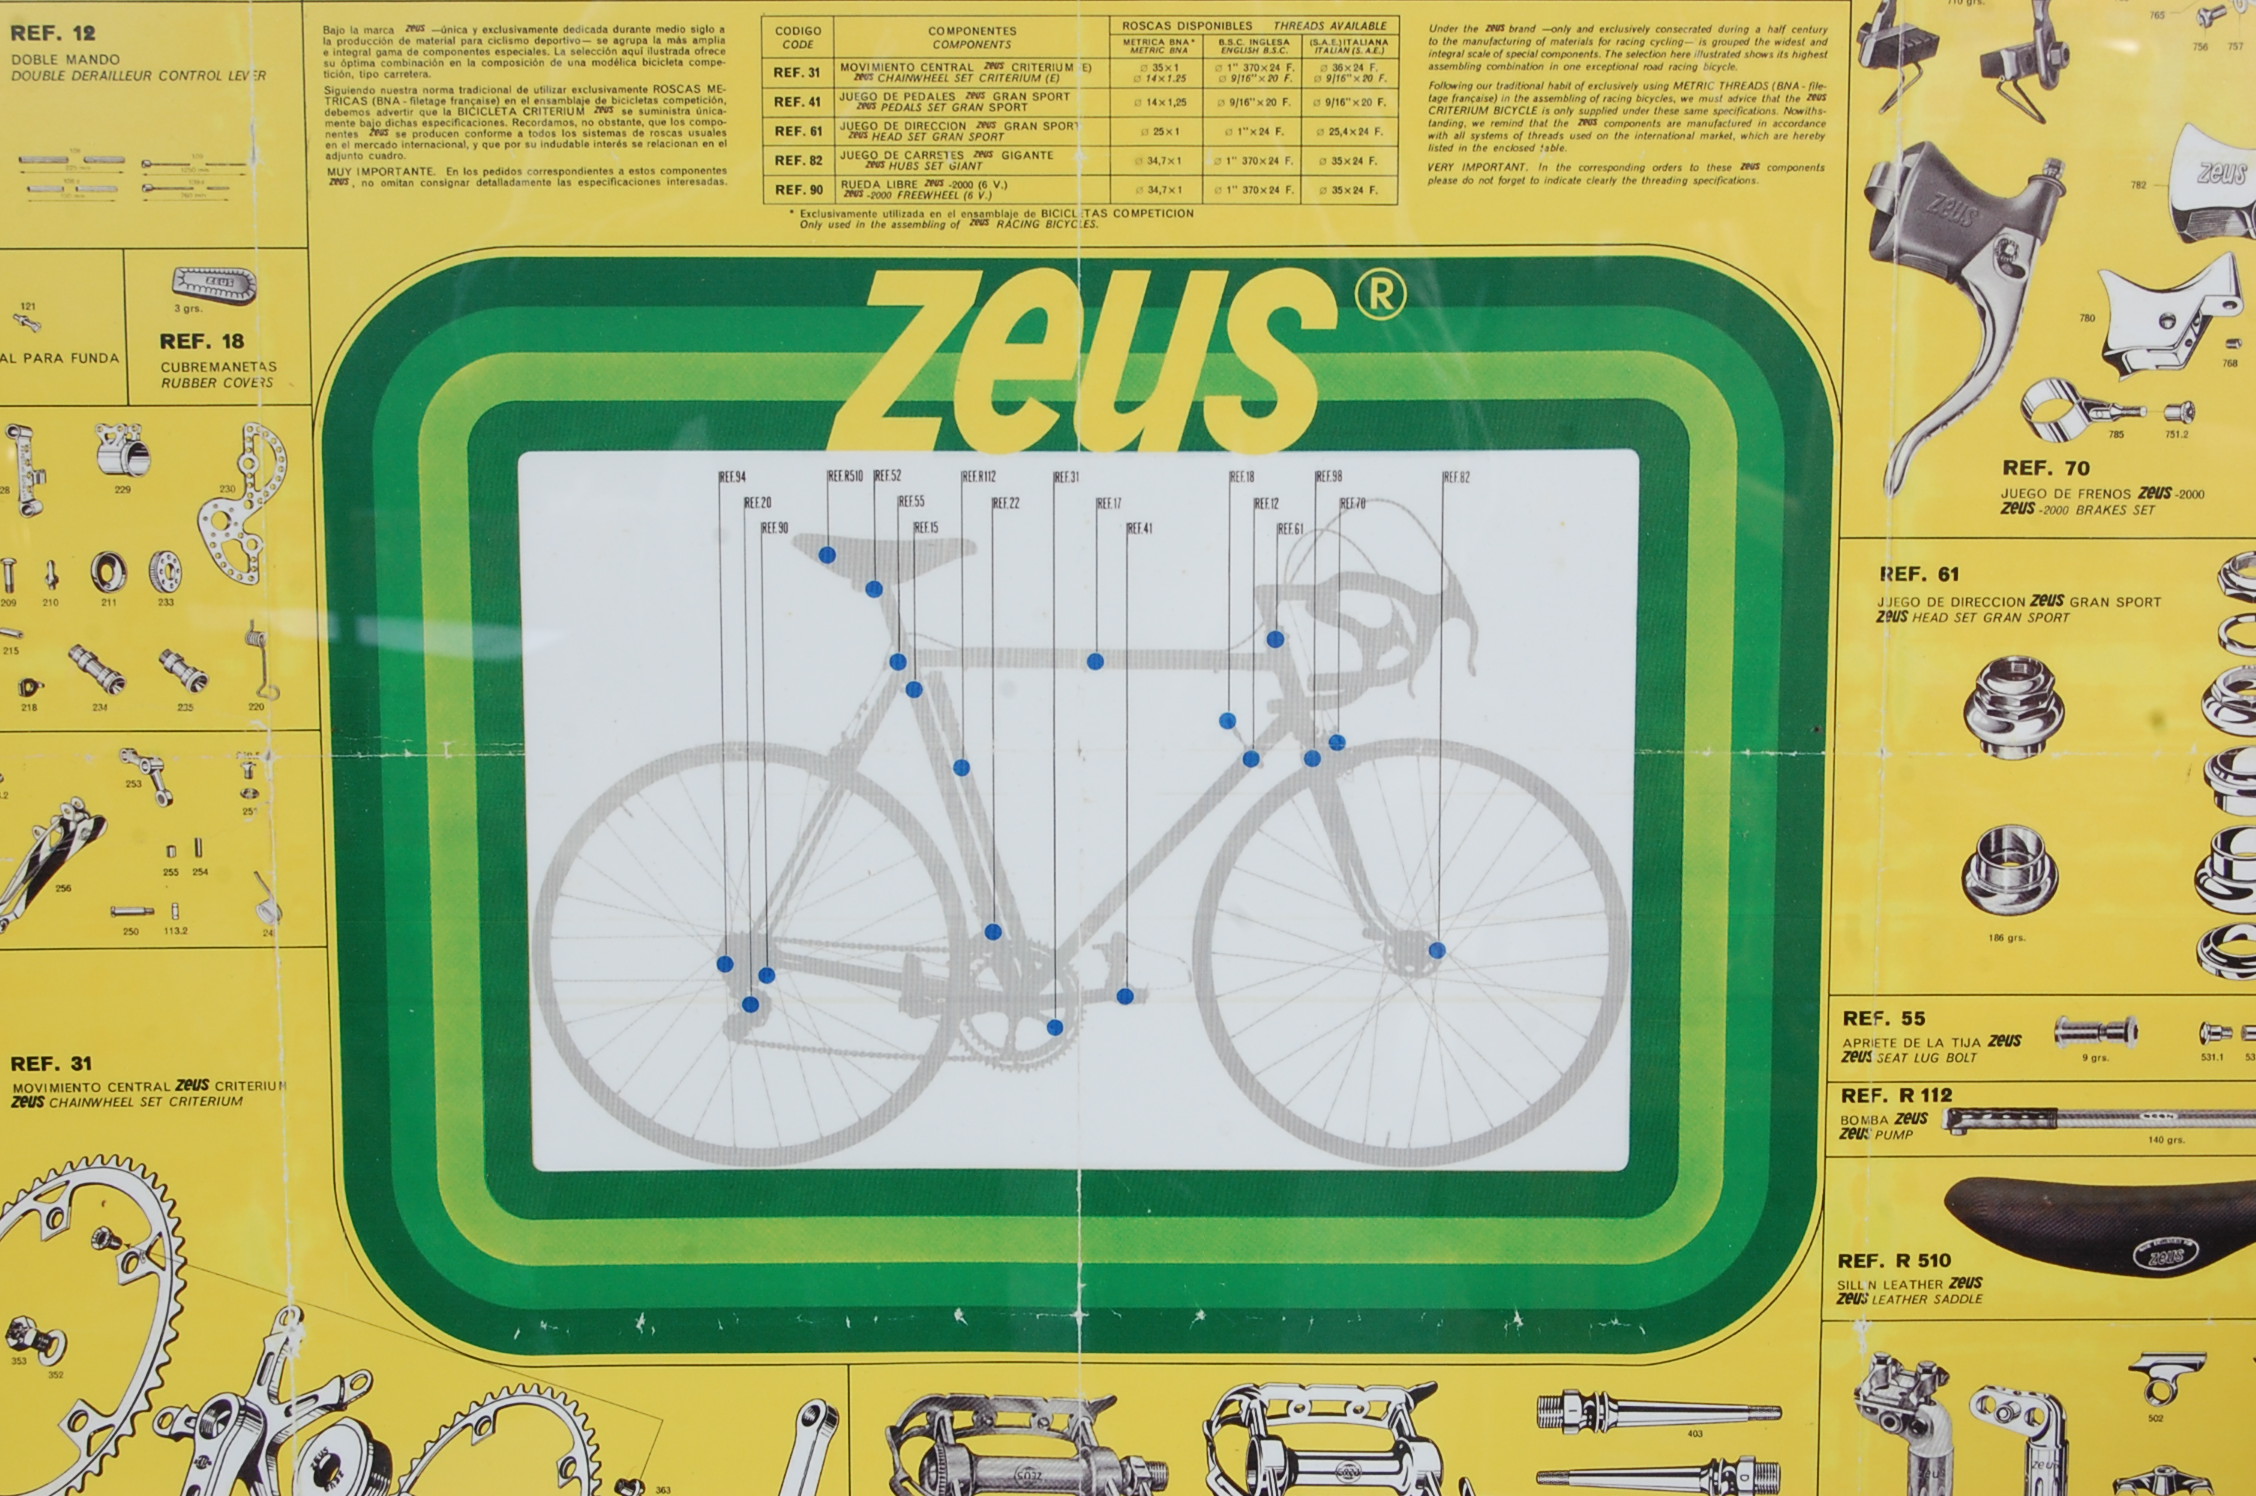 VINTAGE BICYCLES AND SPARES - A 1970S ZEUS ADVERTISEMENT POSTER. - Image 2 of 8